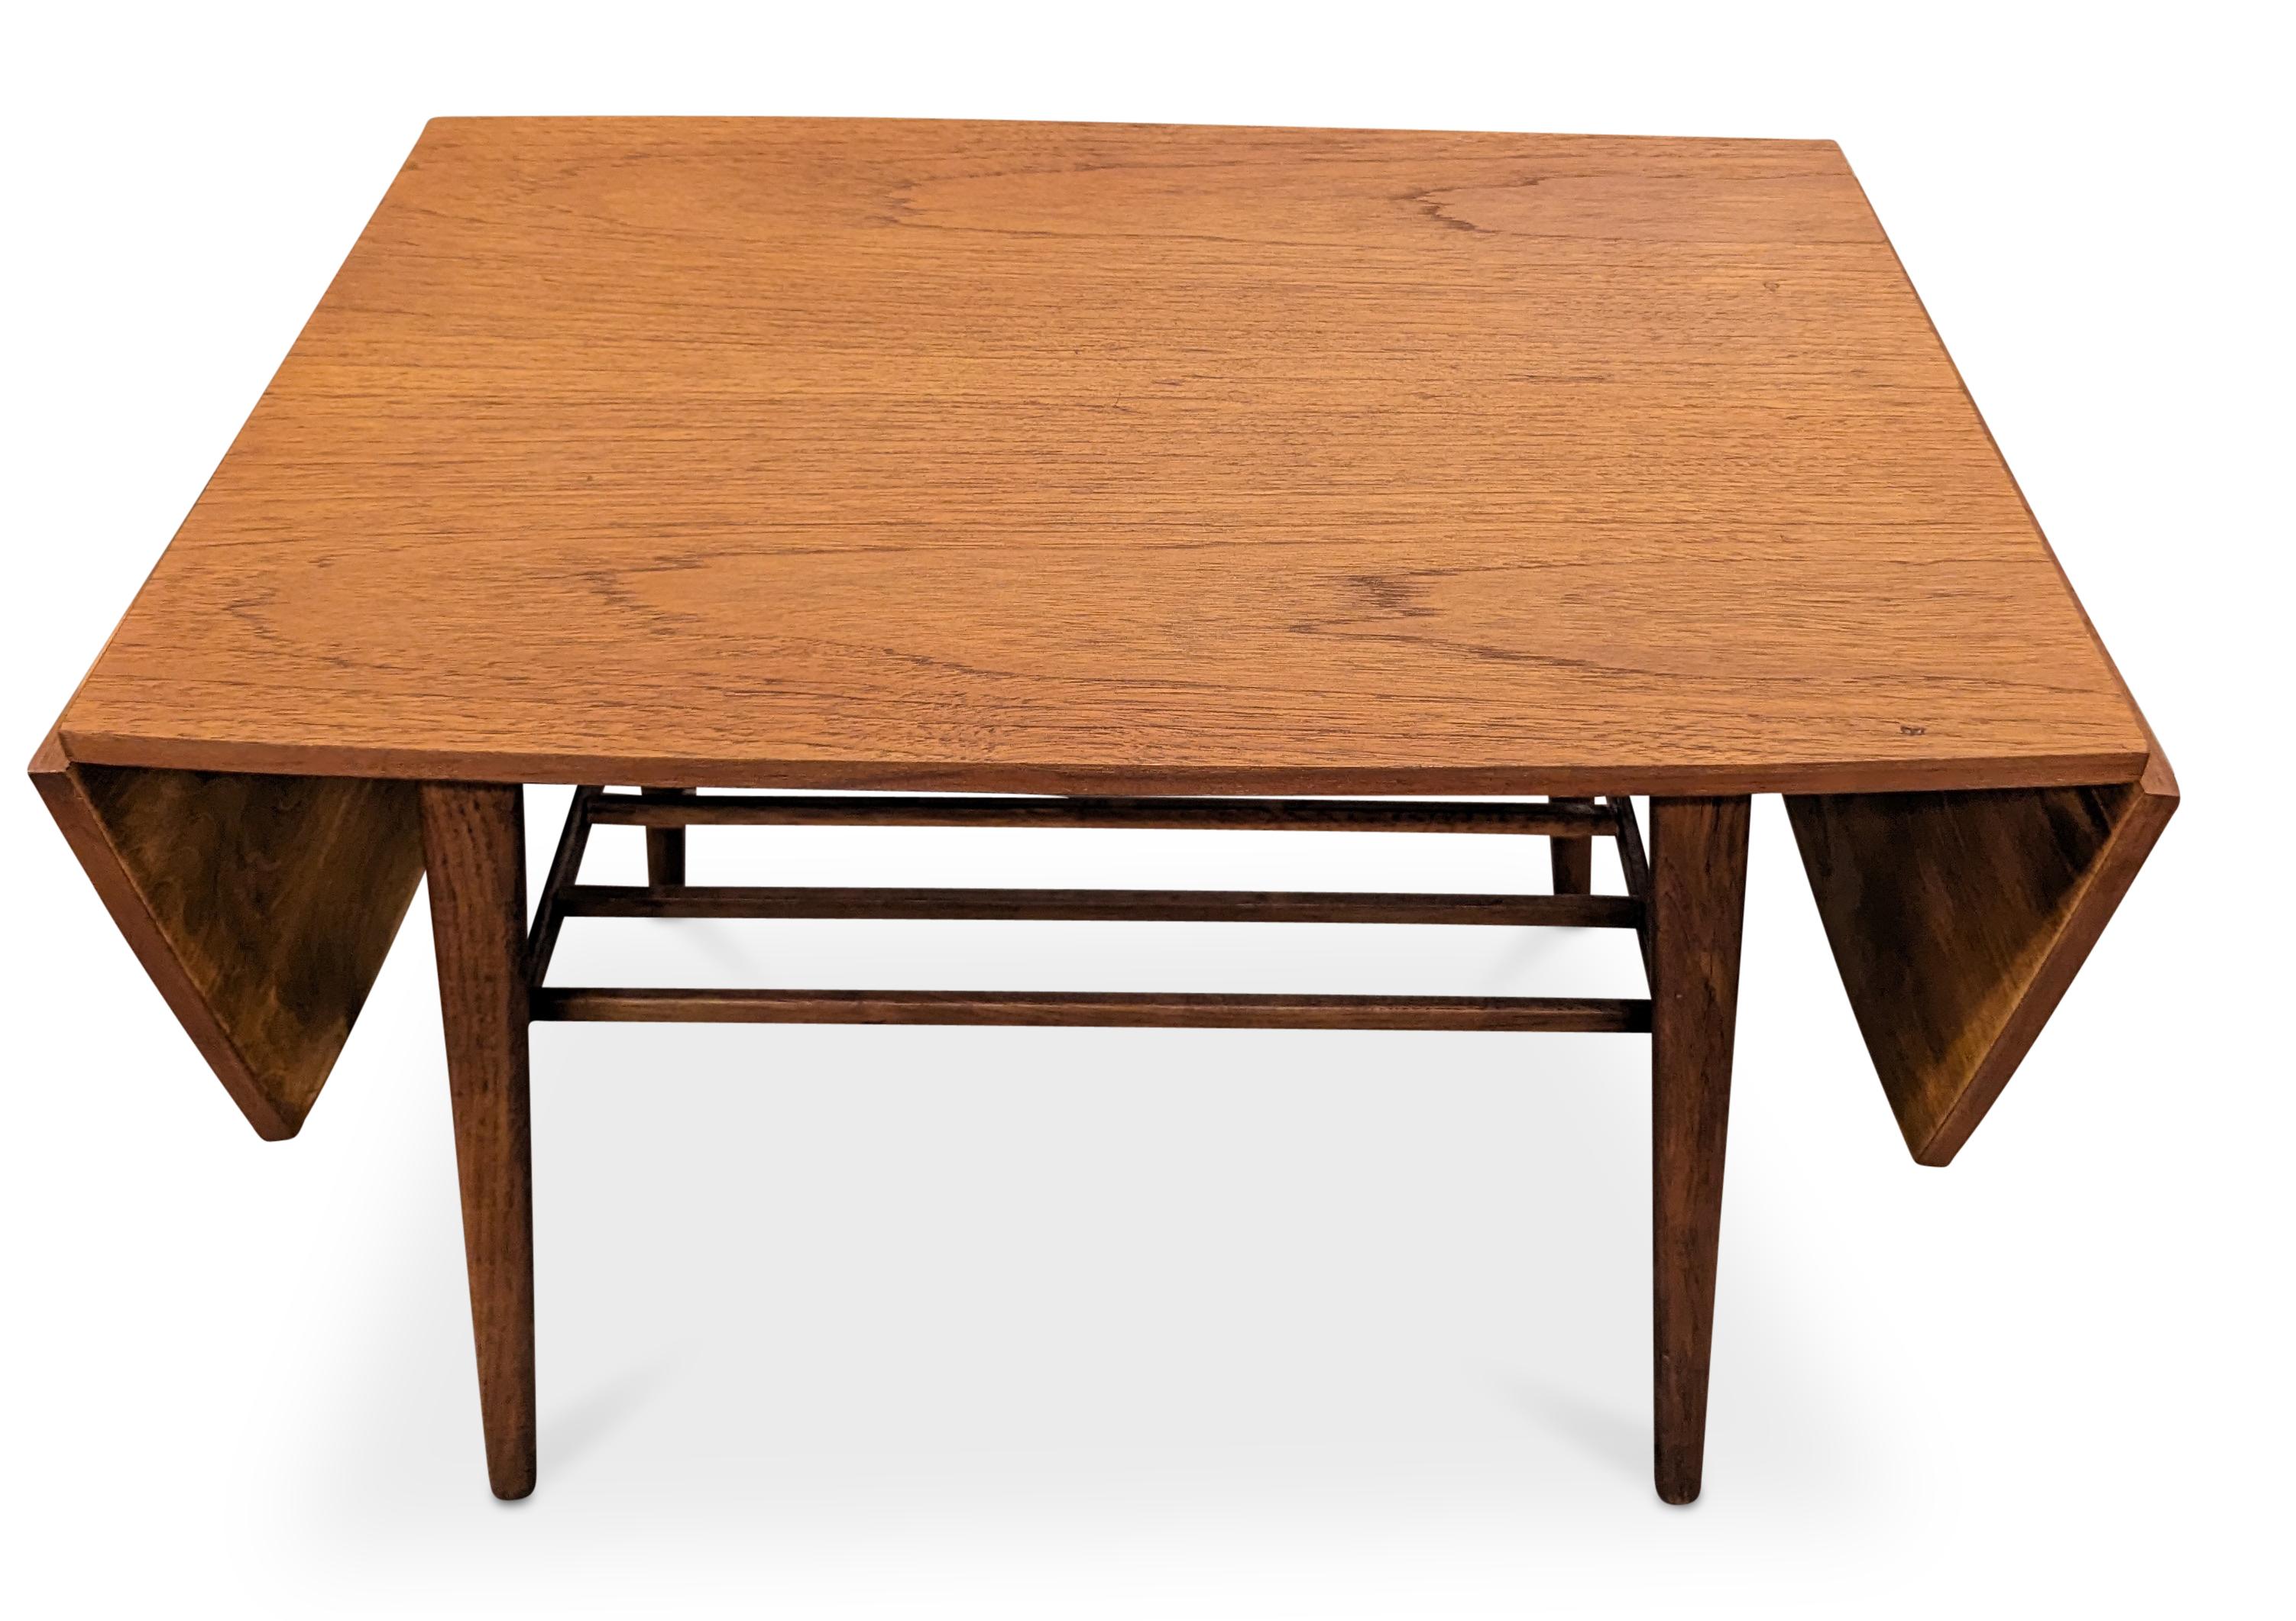 Vintage Danish Mid Century Teak Side / Coffee Table - 022416 In Good Condition For Sale In Jersey City, NJ